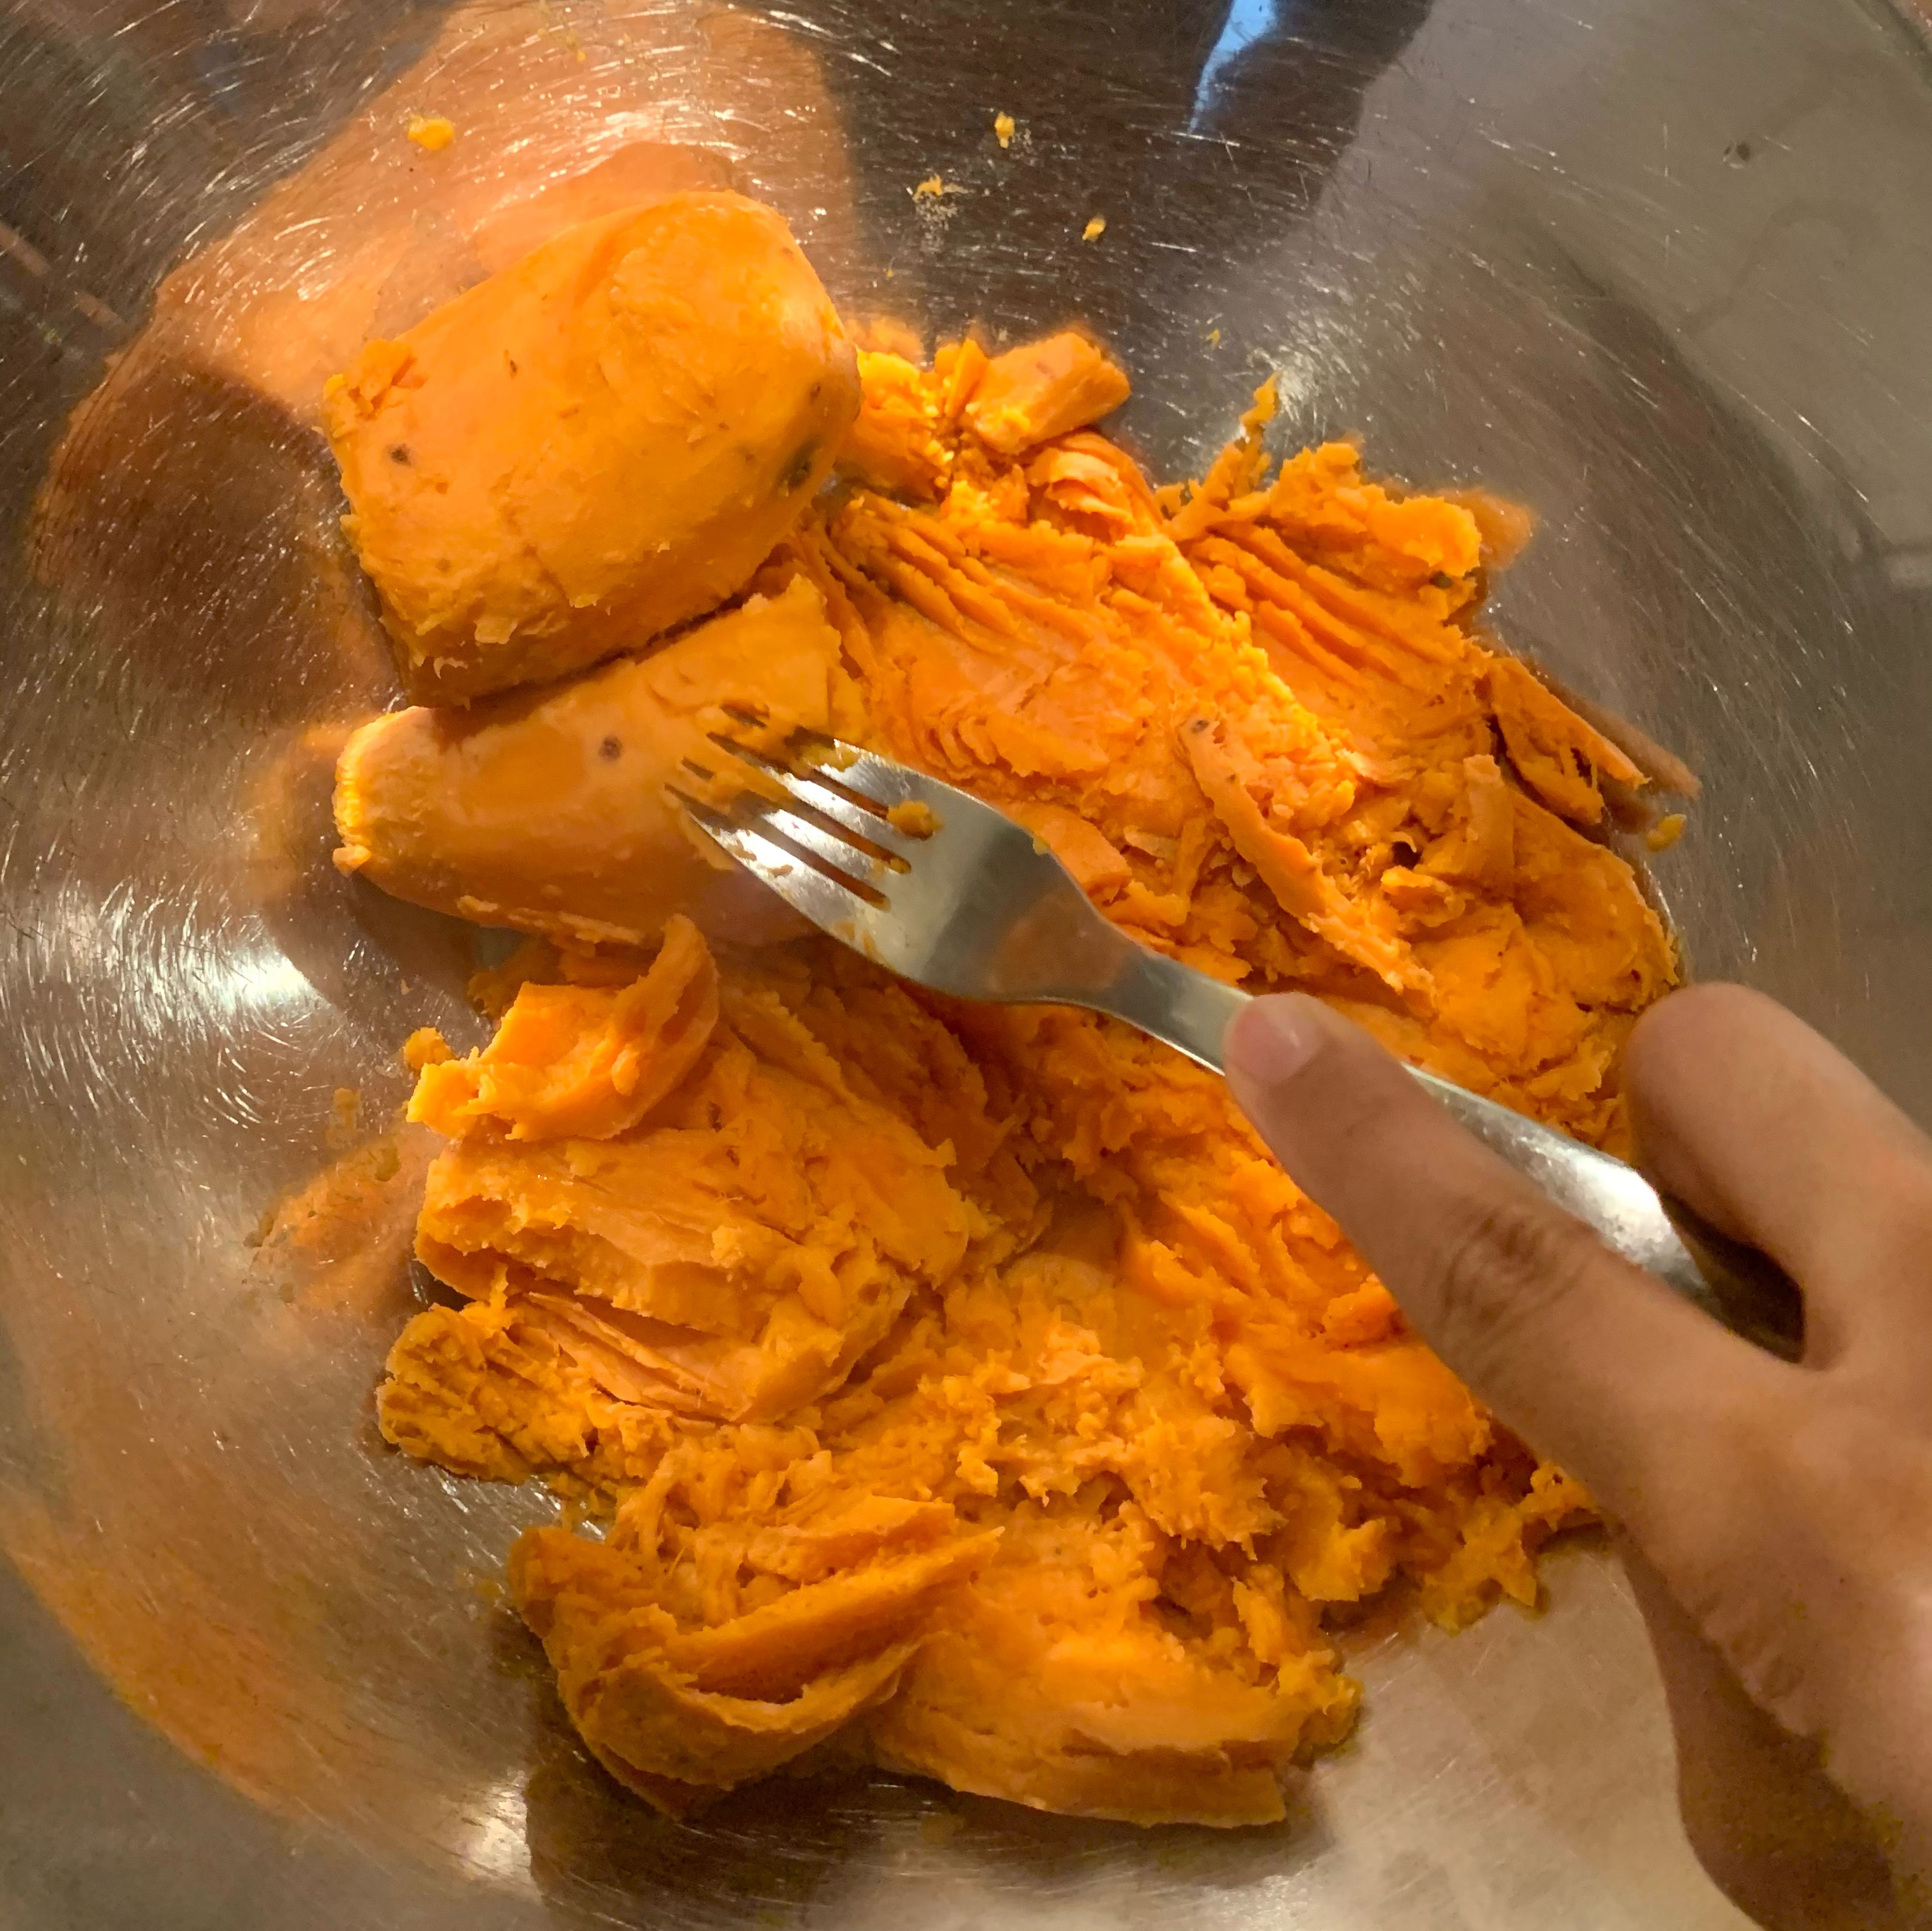 Smash the sweet potatoes in a large bowl.